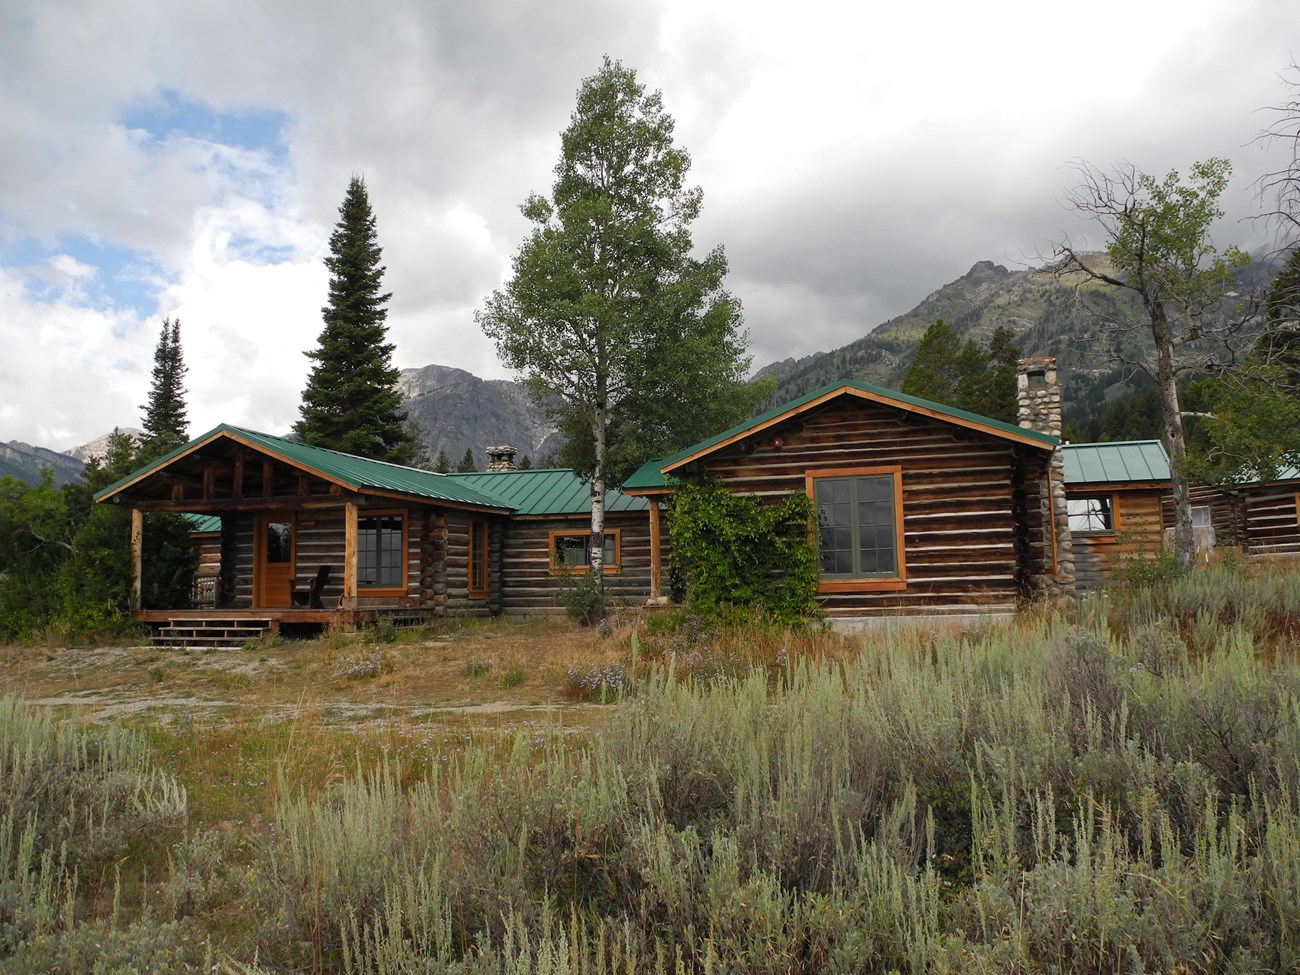 Sagebrush grows in front of a one-story log cabin, surrounded by several trees and tall mountains.